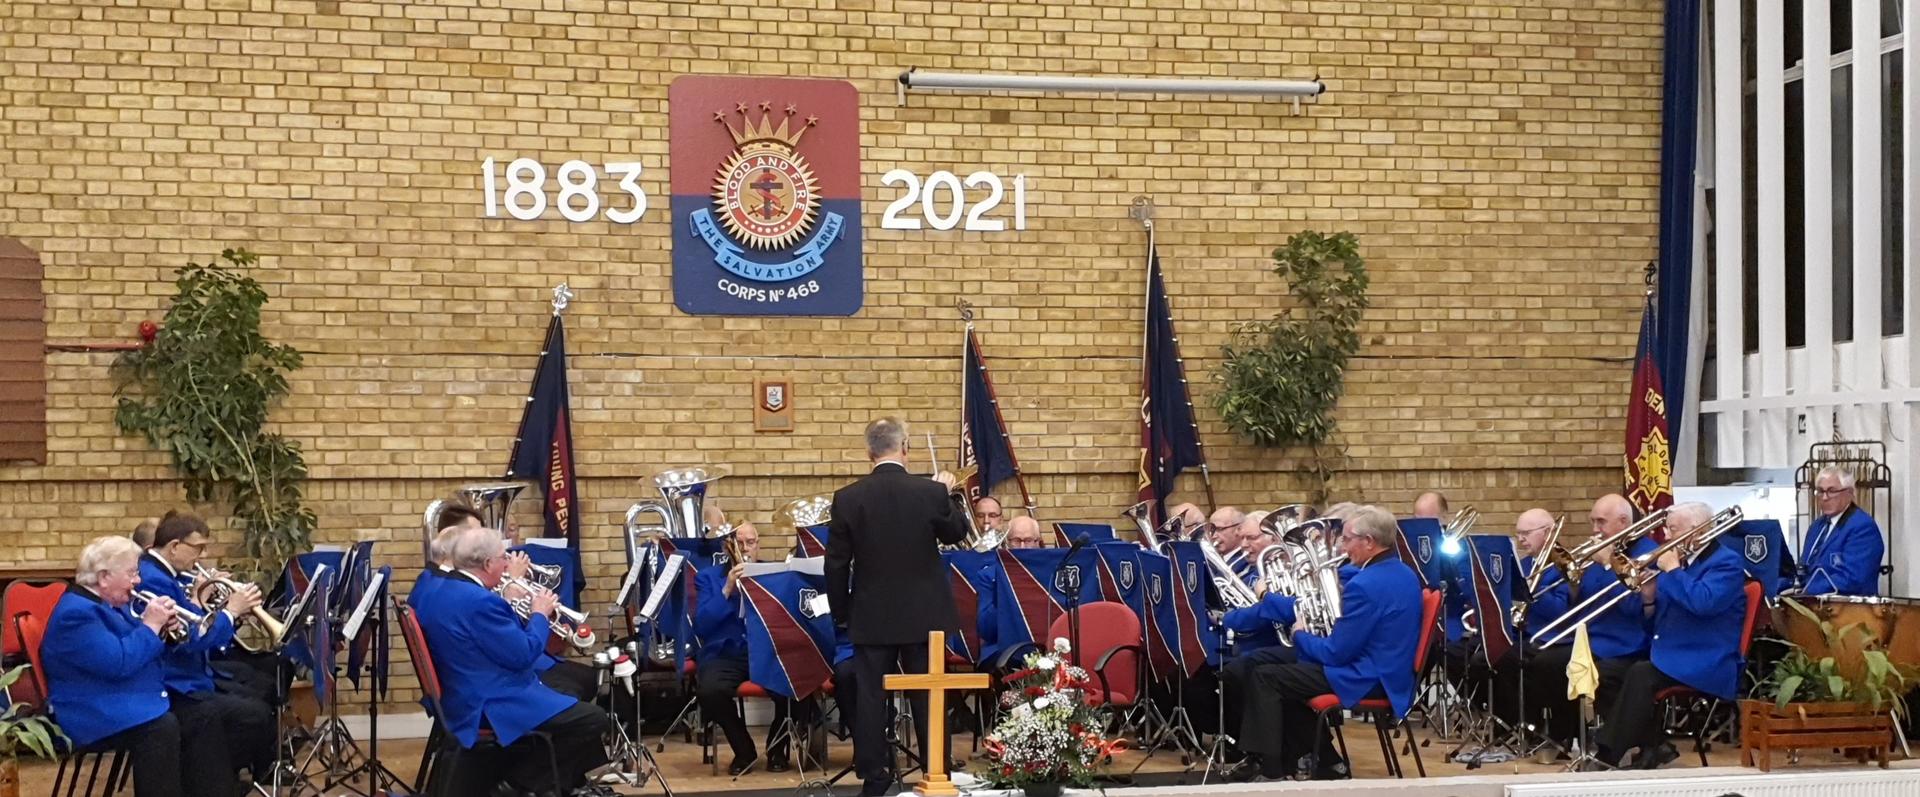 The South London Fellowship Band at Gravesend 2021